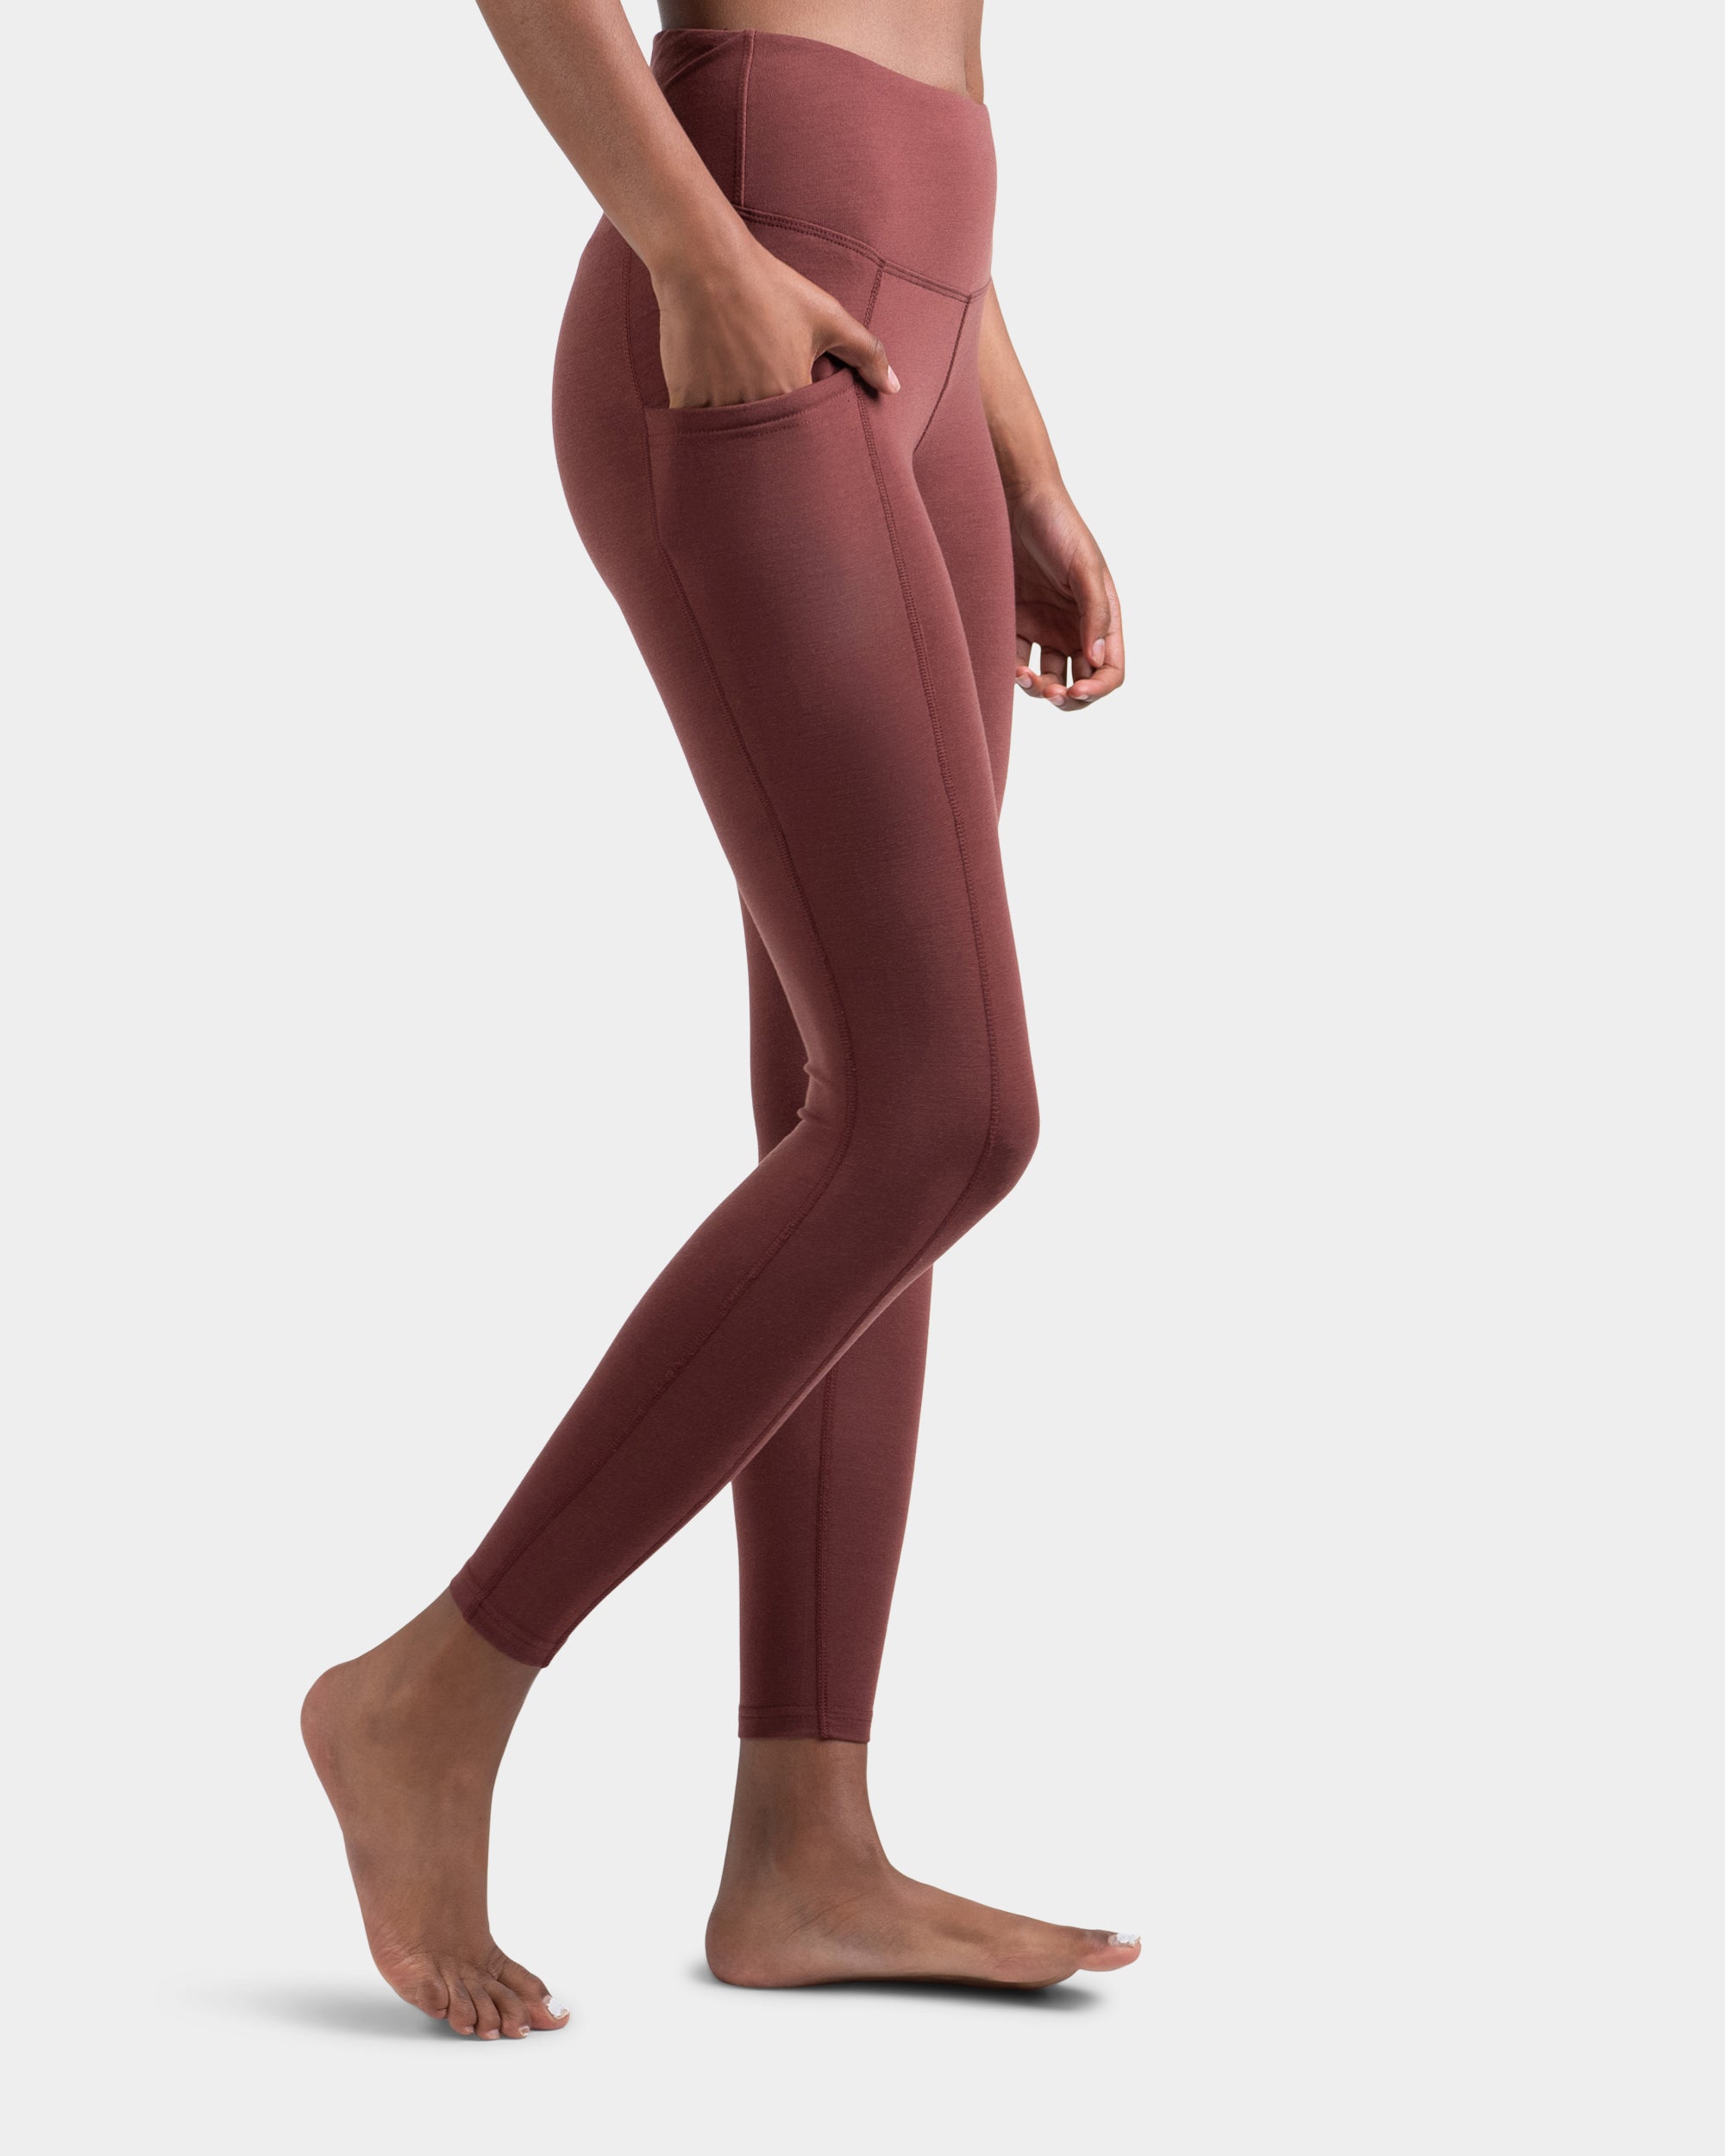 Day-to-day Pocket Legging – Style Luxe Activewear